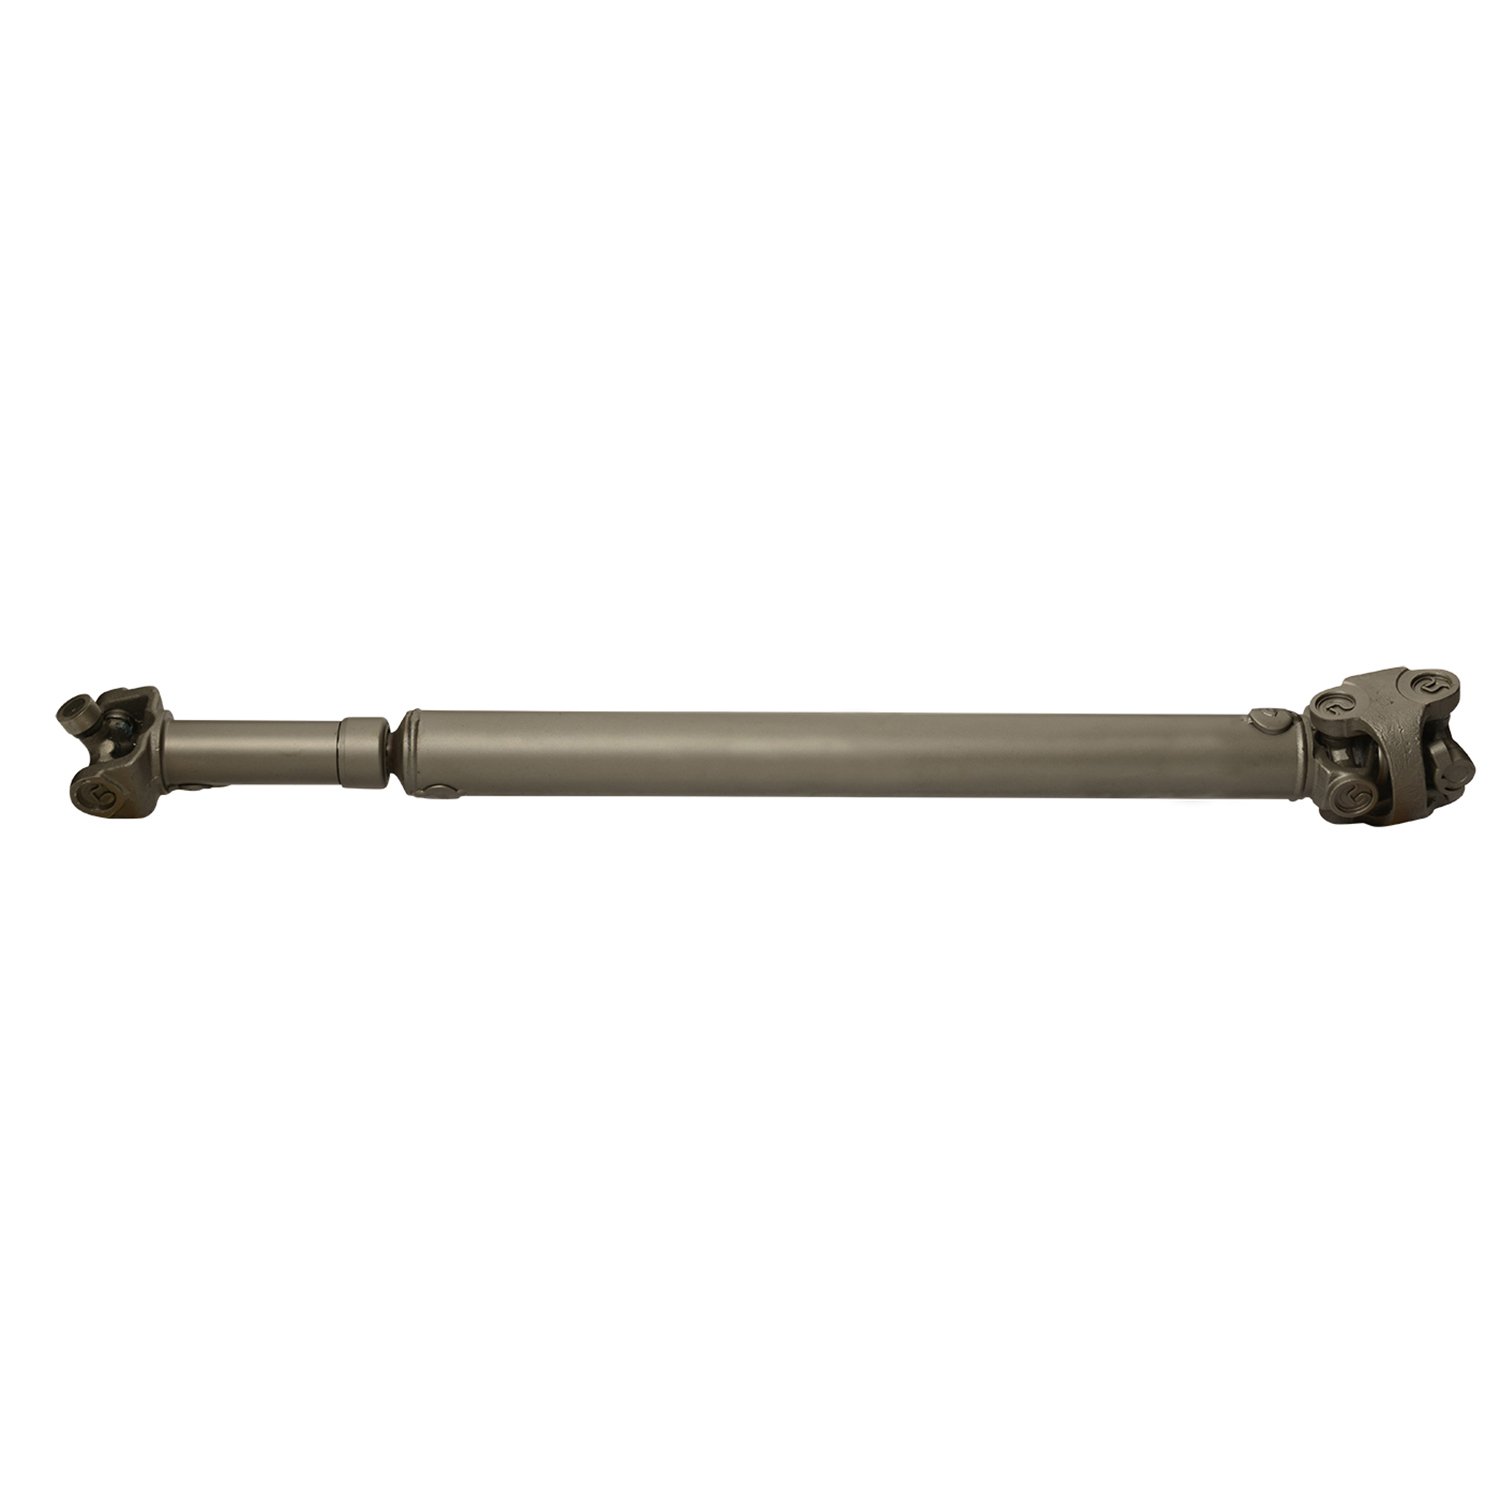 USA Standard ZDS9442 Front Driveshaft, For Bronco/F-Series Trucks, 39.5 in. Center-To-Center